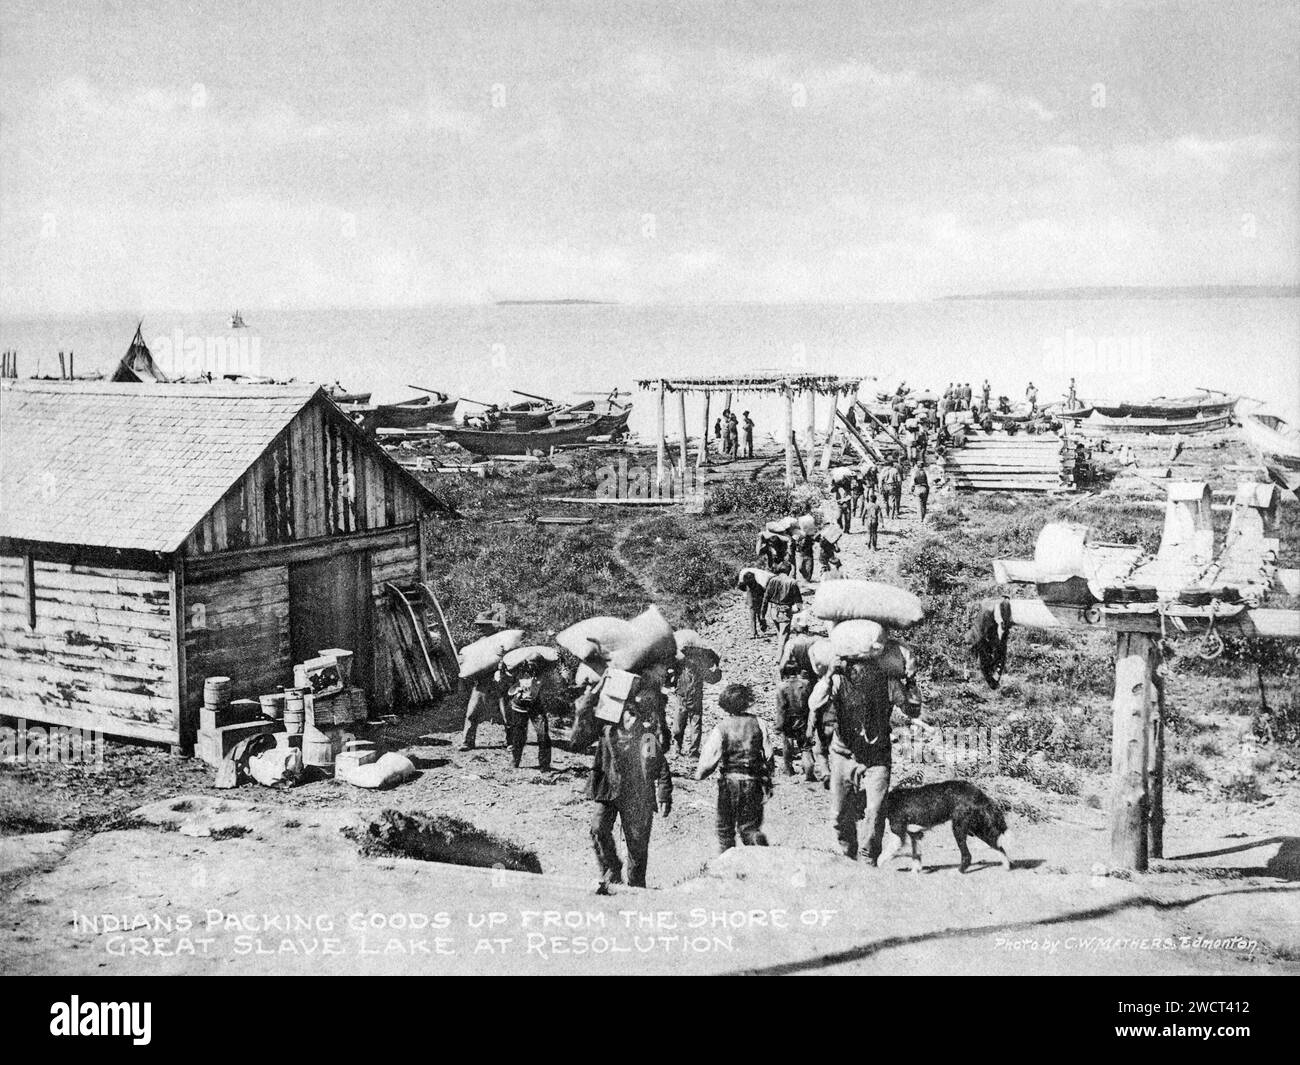 A 1901 photograph of supplies being unloaded at Fort Resolution on the Great Slave Lake in the Northwest Territories, taken by C W Mathers on an expedition to the far north of Canada and published in his book ‘The Far North’. Mathers captioned this photograph: Indians packing goods up from the shore of Great Slave Lake at Resolution. Stock Photo